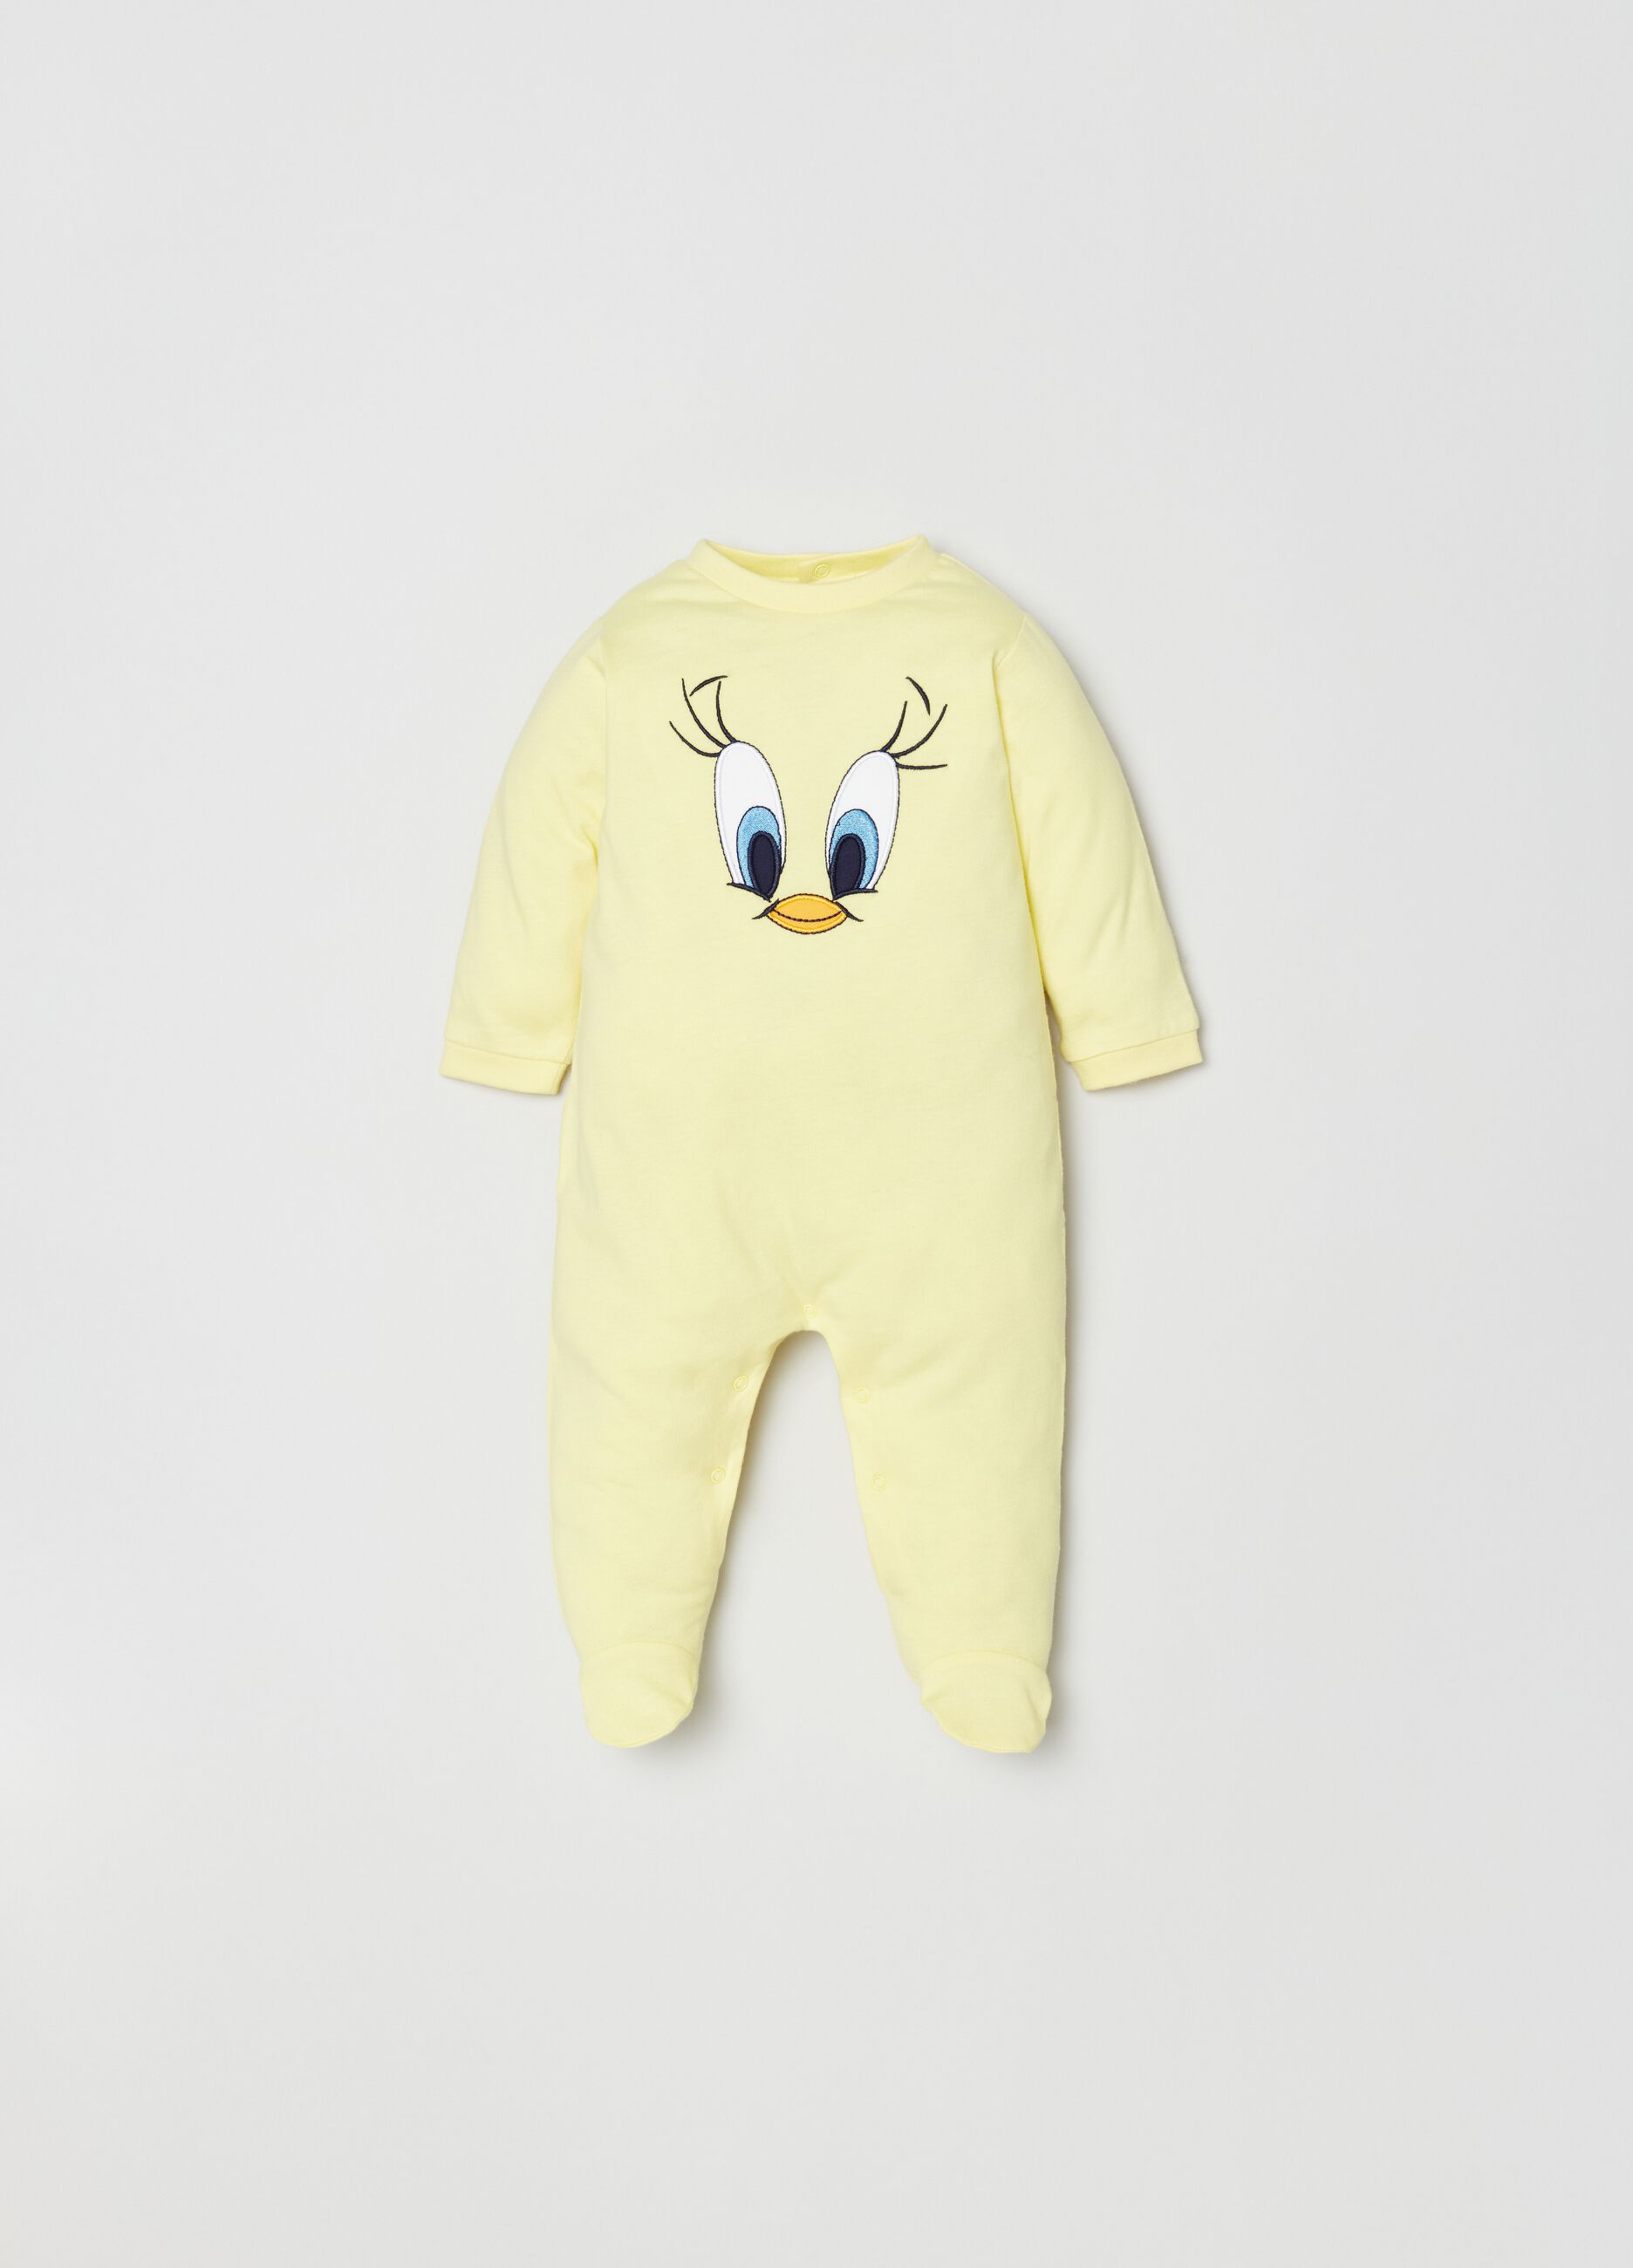 Cotton onesie with feet and Tweetie Pie embroidery